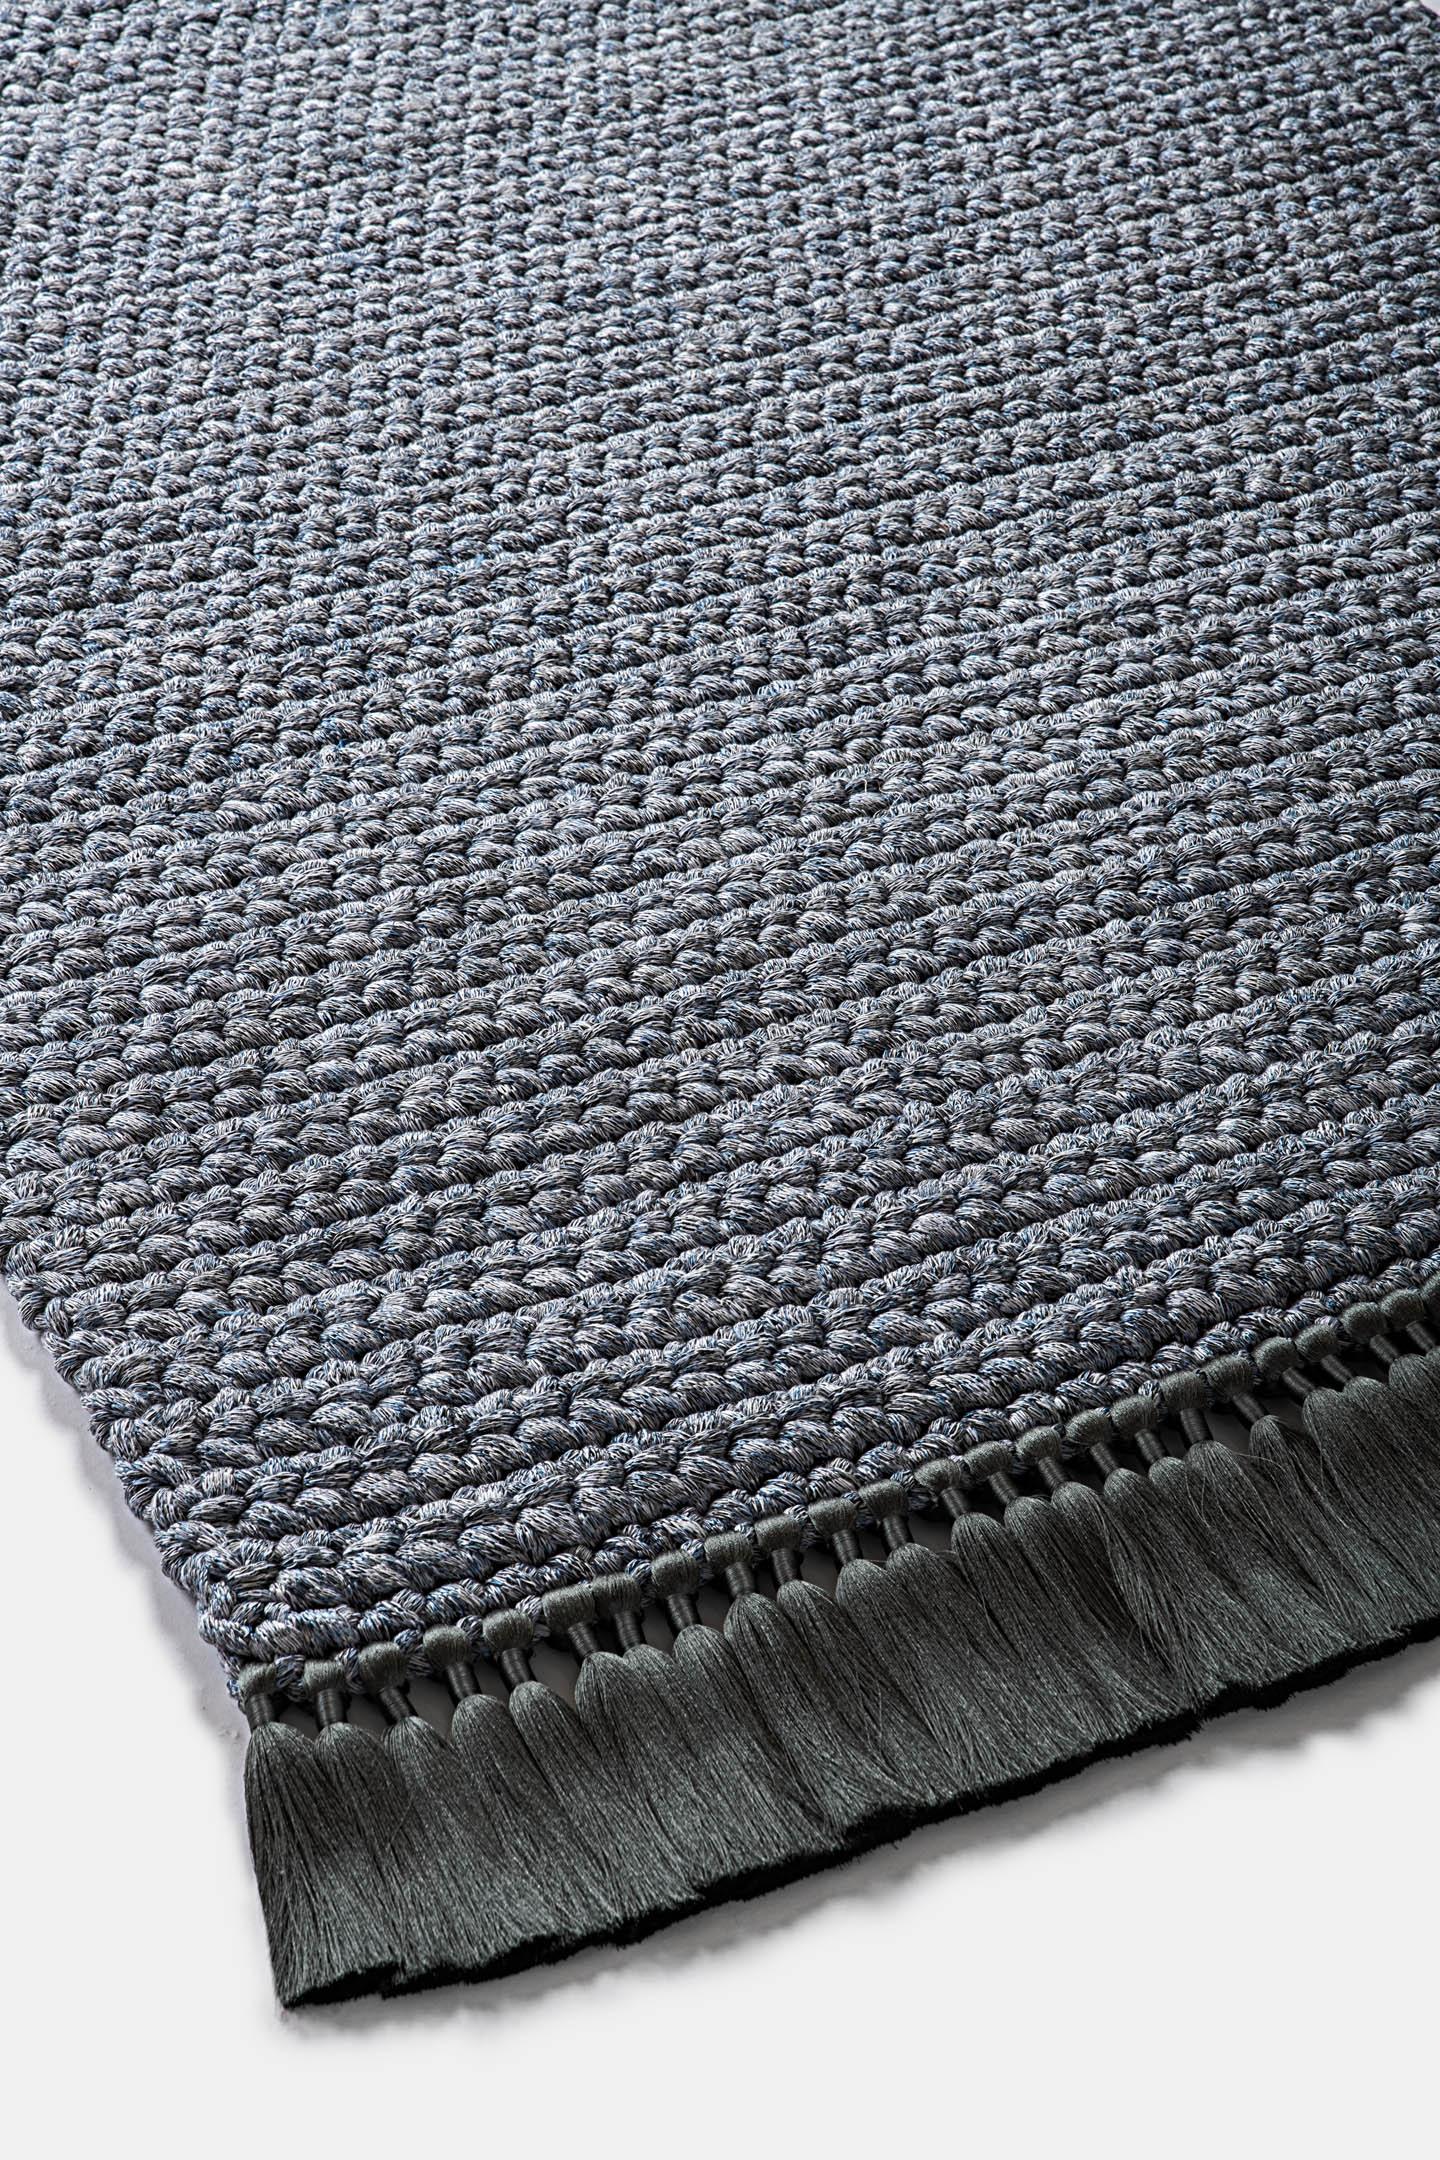 Cotton Handmade Crochet Thick Rug 120x200 cm in Blue Grey Colors with Grey Tassels For Sale